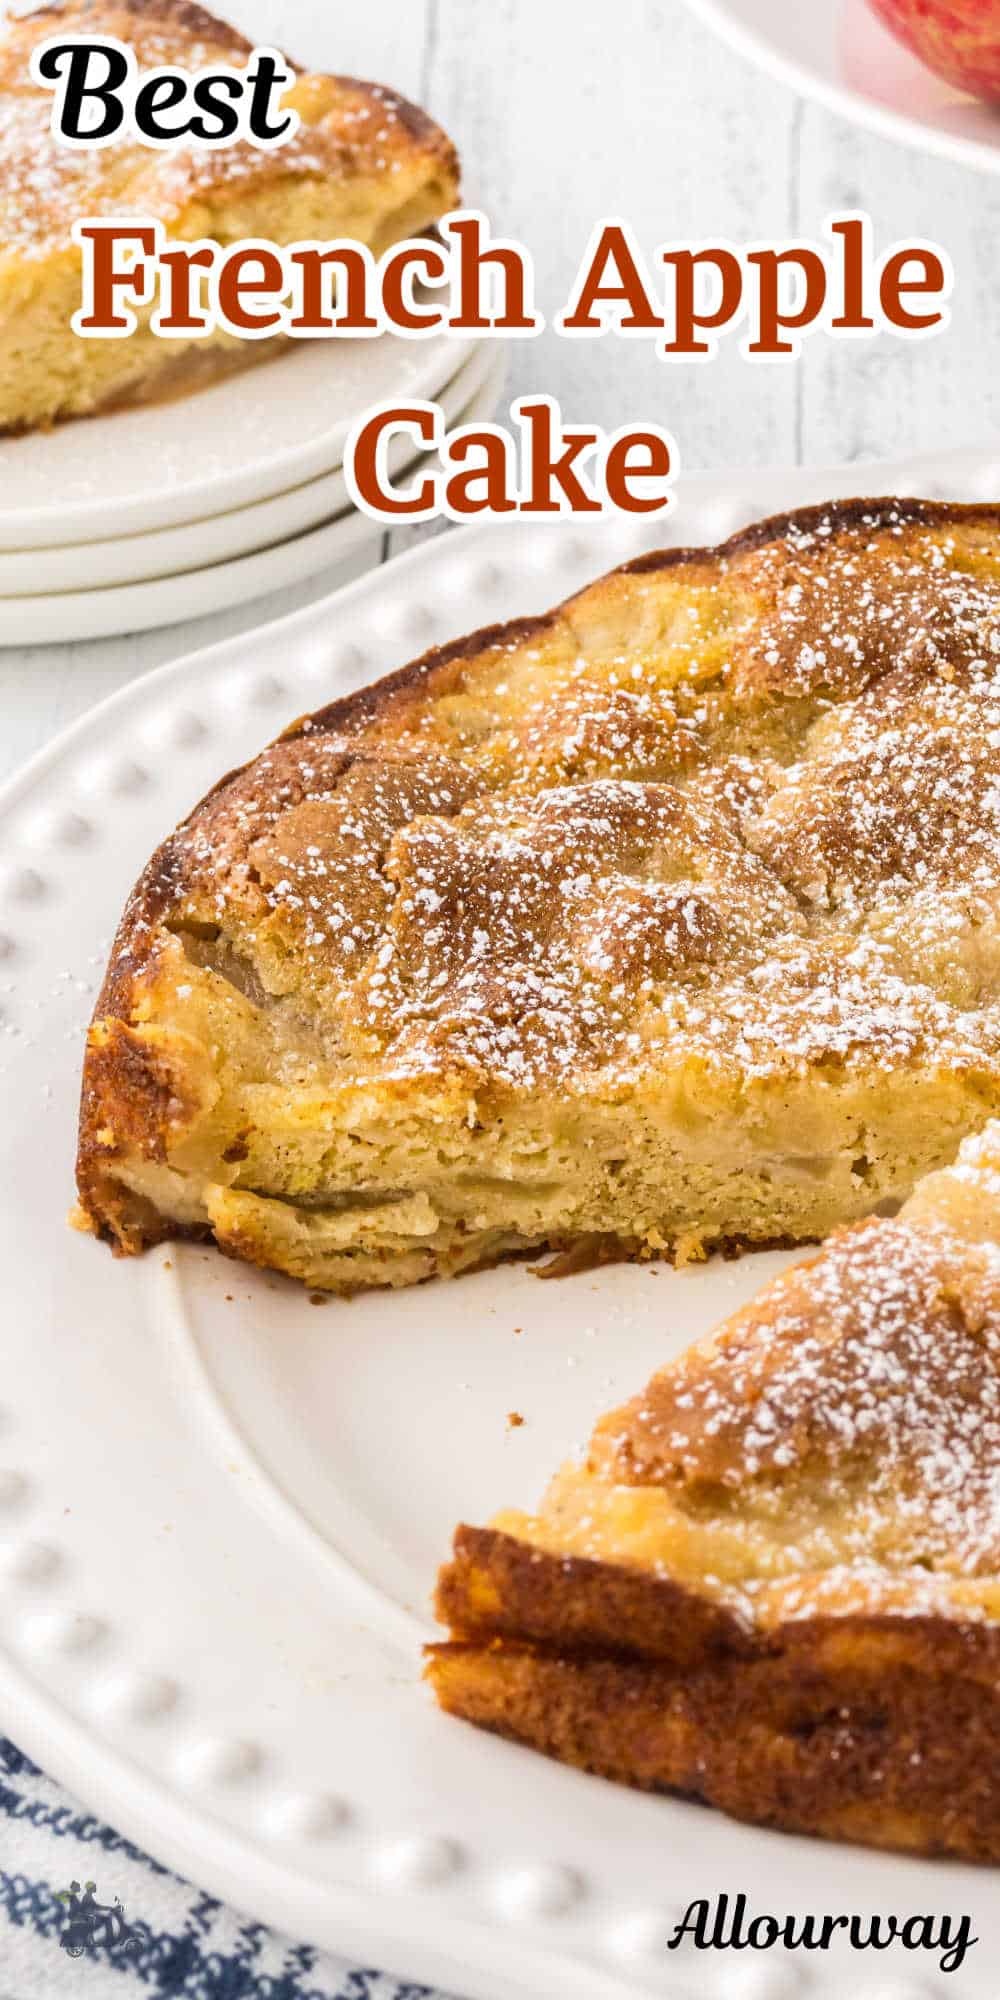 Prepare to fall head over heels for Dorie Greenspan's French Apple Cake-inspired recipe. This magically mouthwatering creation combines the perfect balance of tender apples, warm spices, and a luscious buttery crust—it's simply irresistible!